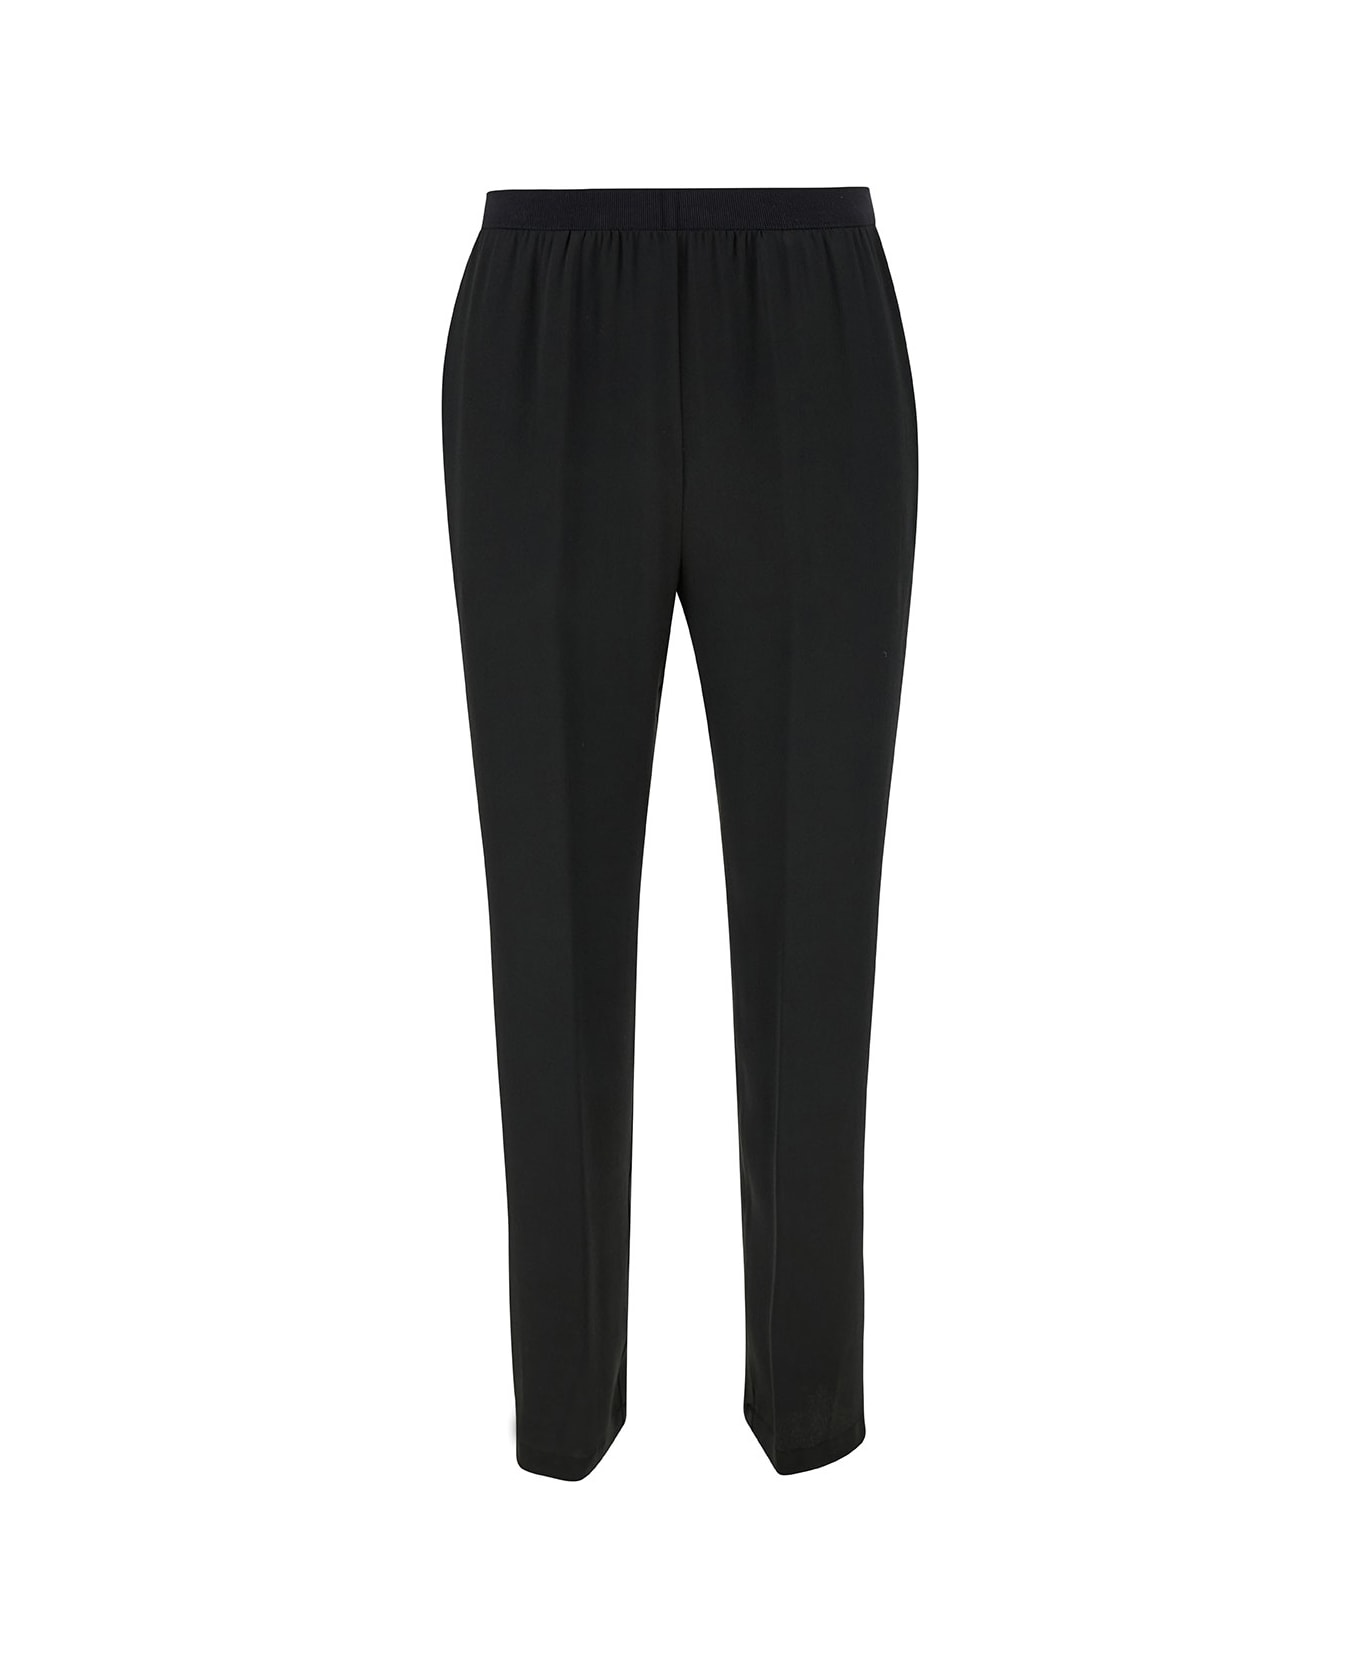 SEMICOUTURE 'philippa' Black Pants With Elastic Waistband In Acetate Blend Woman - Black